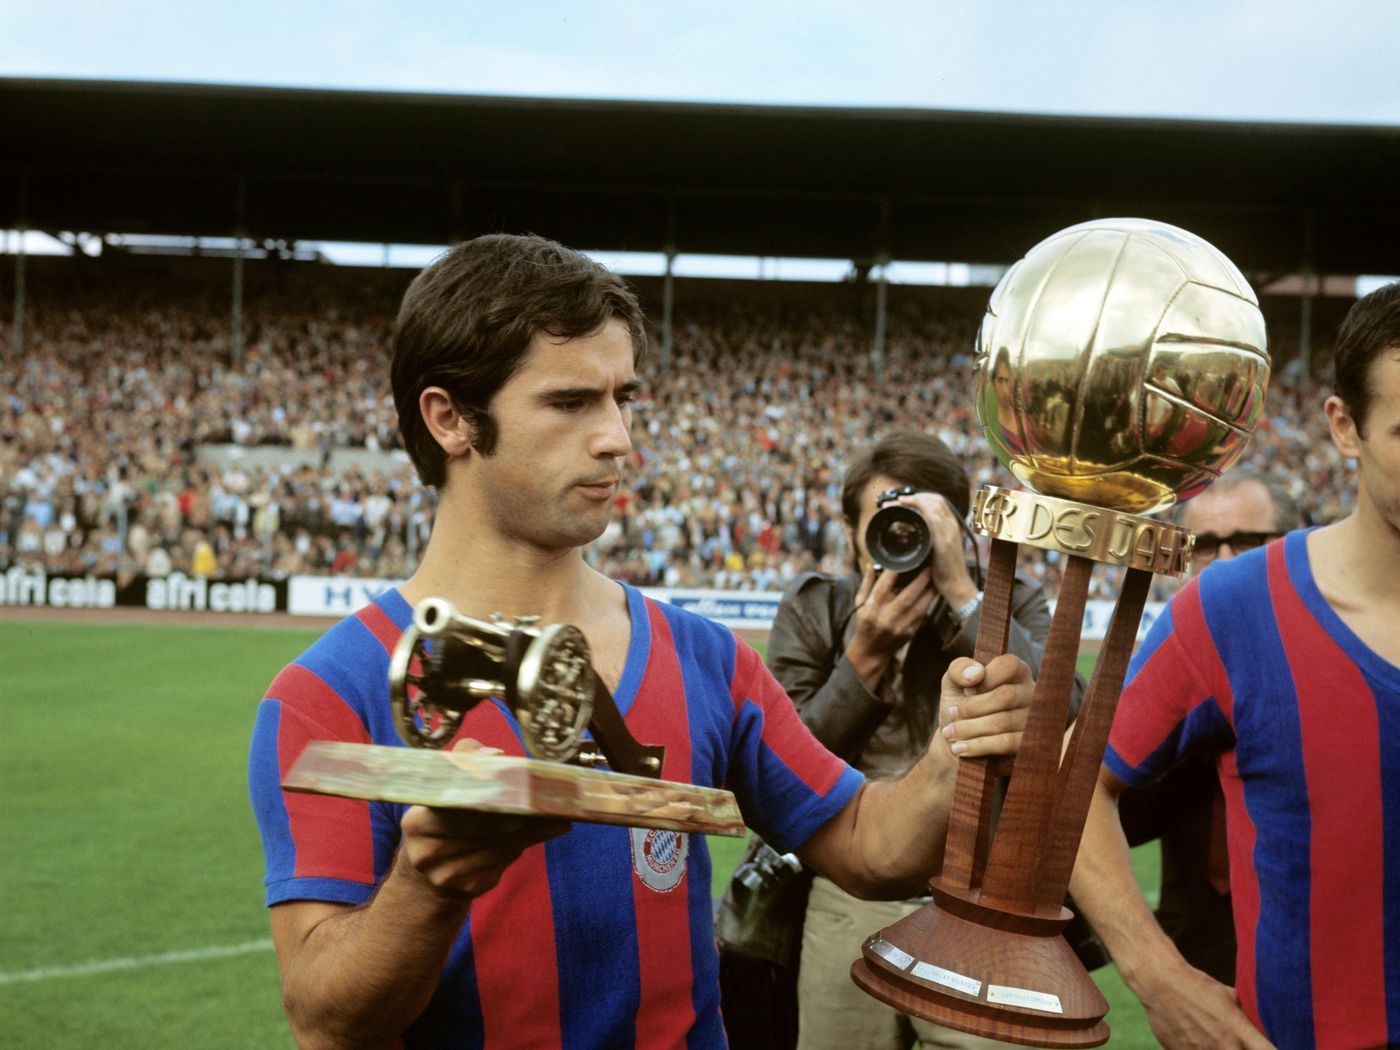 Hansi Flick says he thinks Gerd Müller is the greatest footballer of all time. Football Works